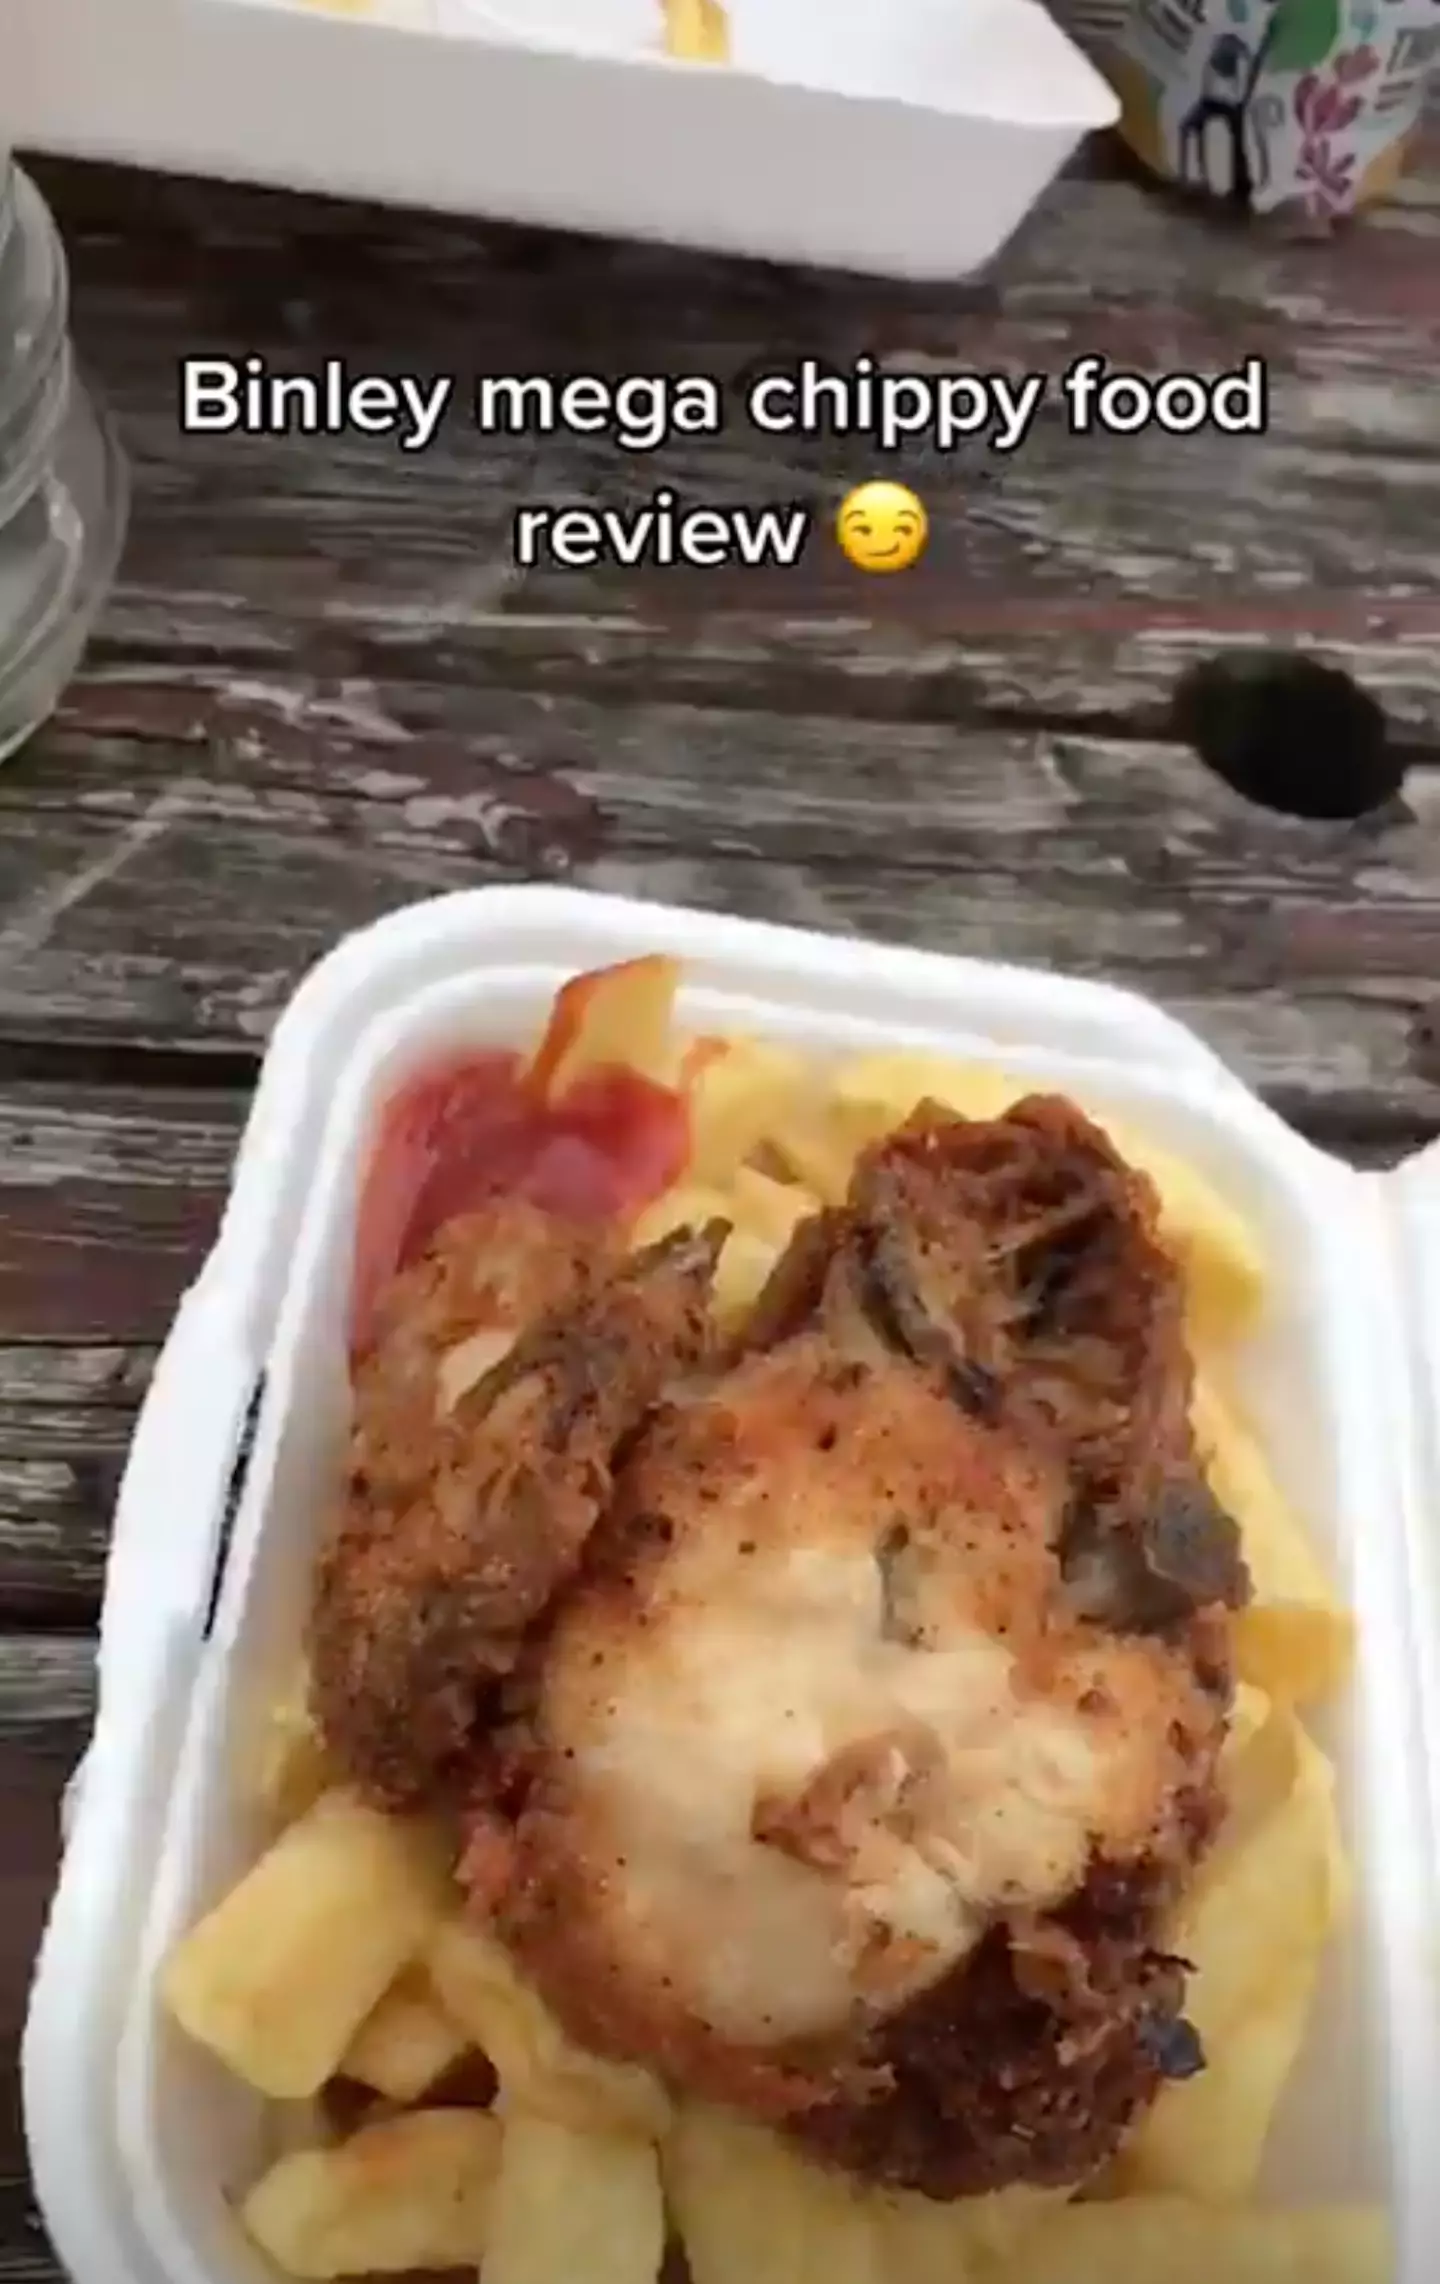 The TikToker gave the food a decent review, however.